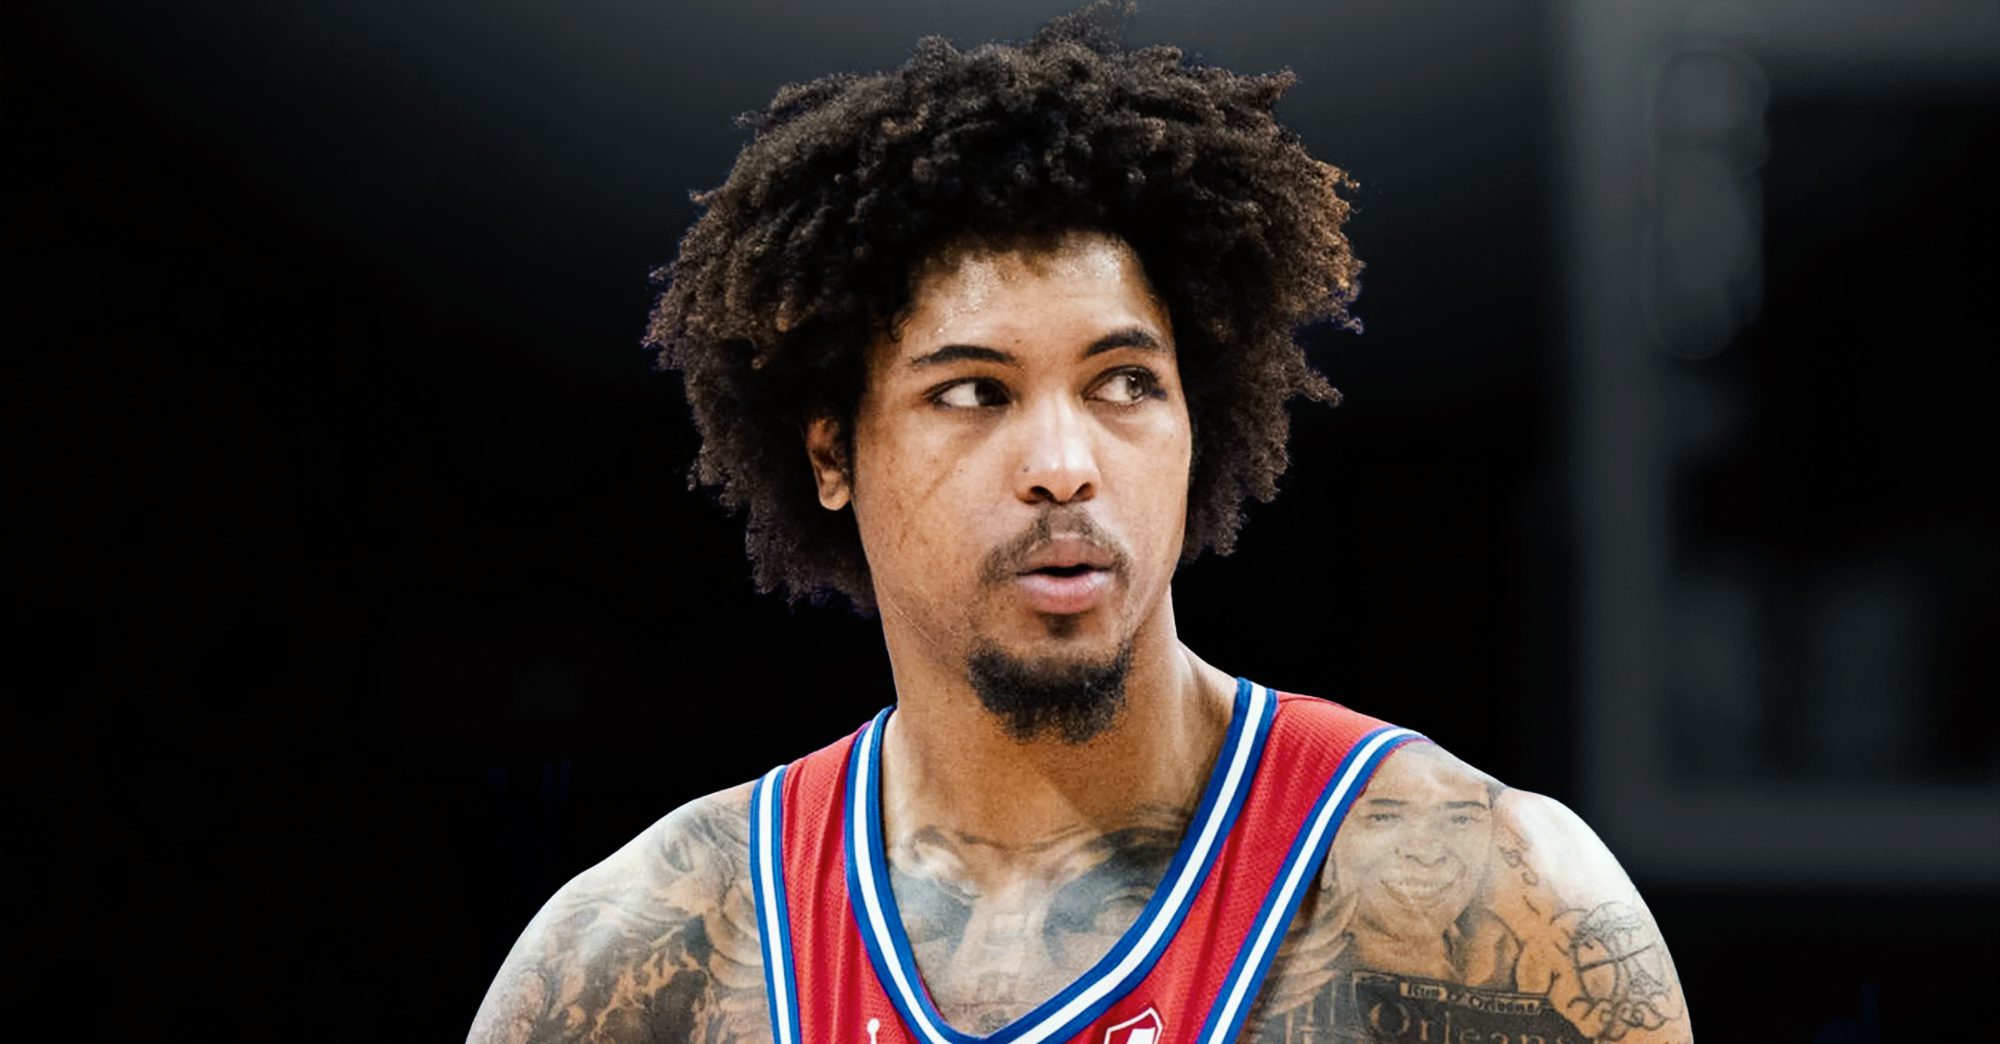 Kelly Oubre Jr.’s Accident Under Internal Police Investigation: Report